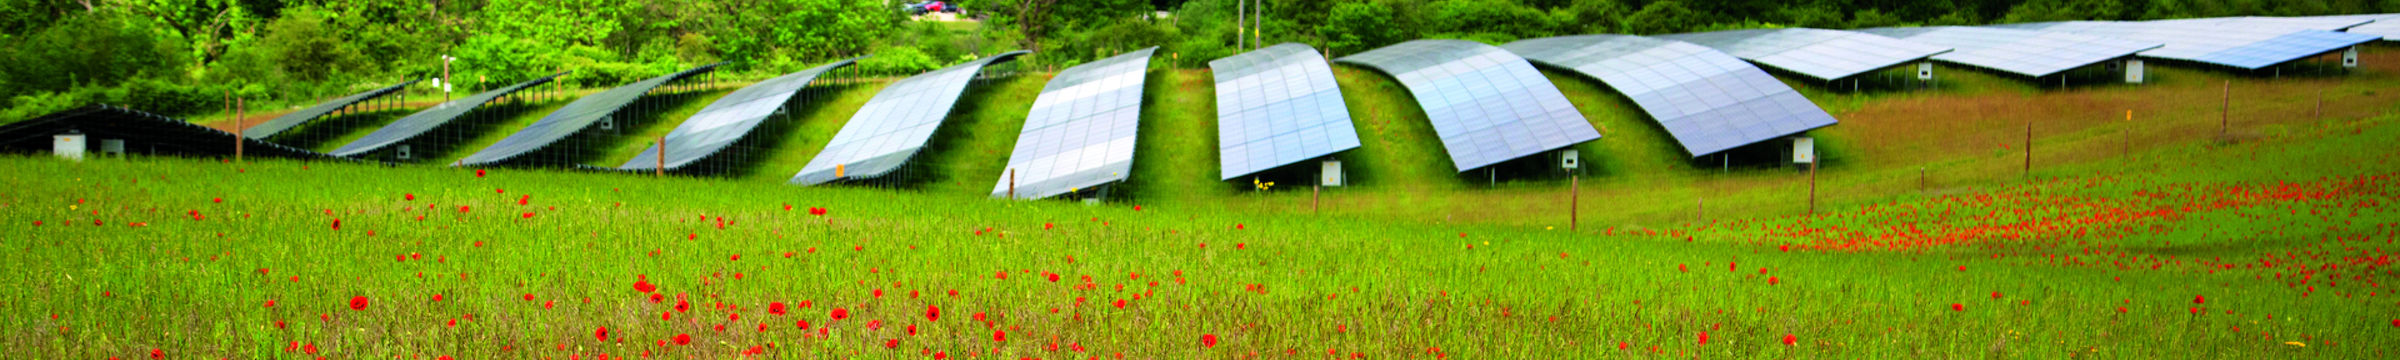 Field with solar panels and flowers. 